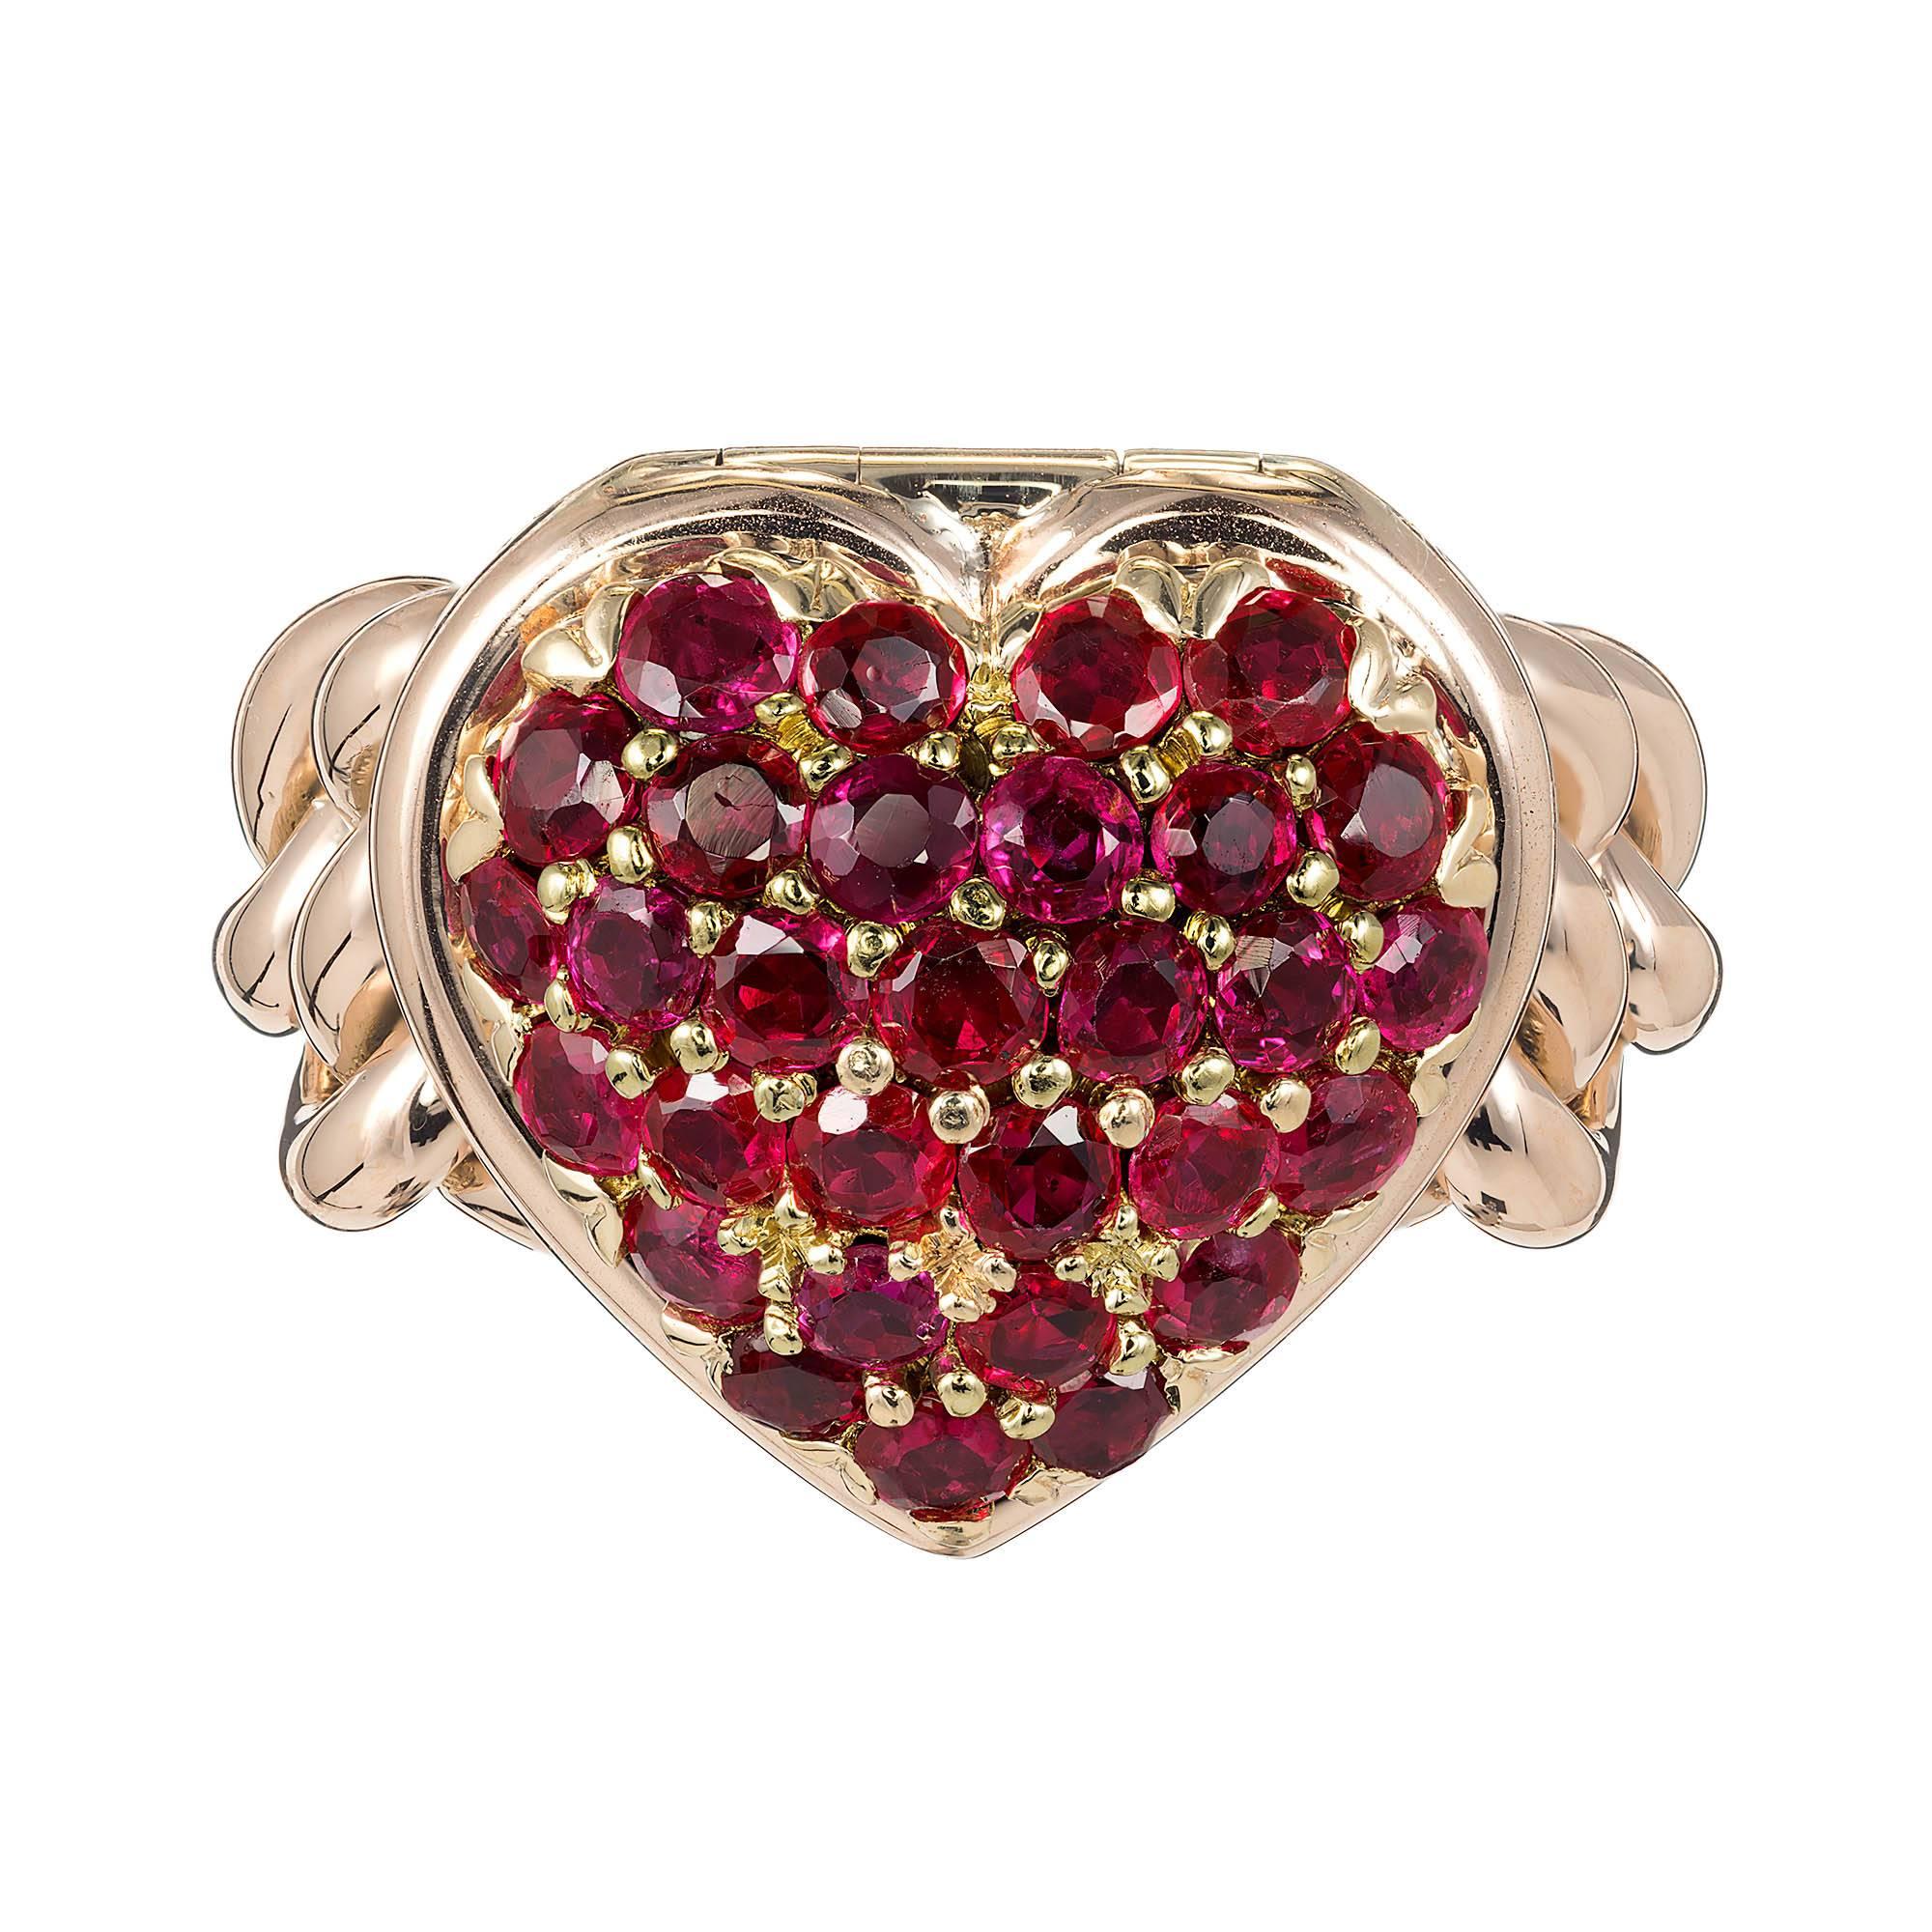 Tiffany & Co. 2.50 Carat Ruby Heart Locket Rose Gold Cocktail Ring